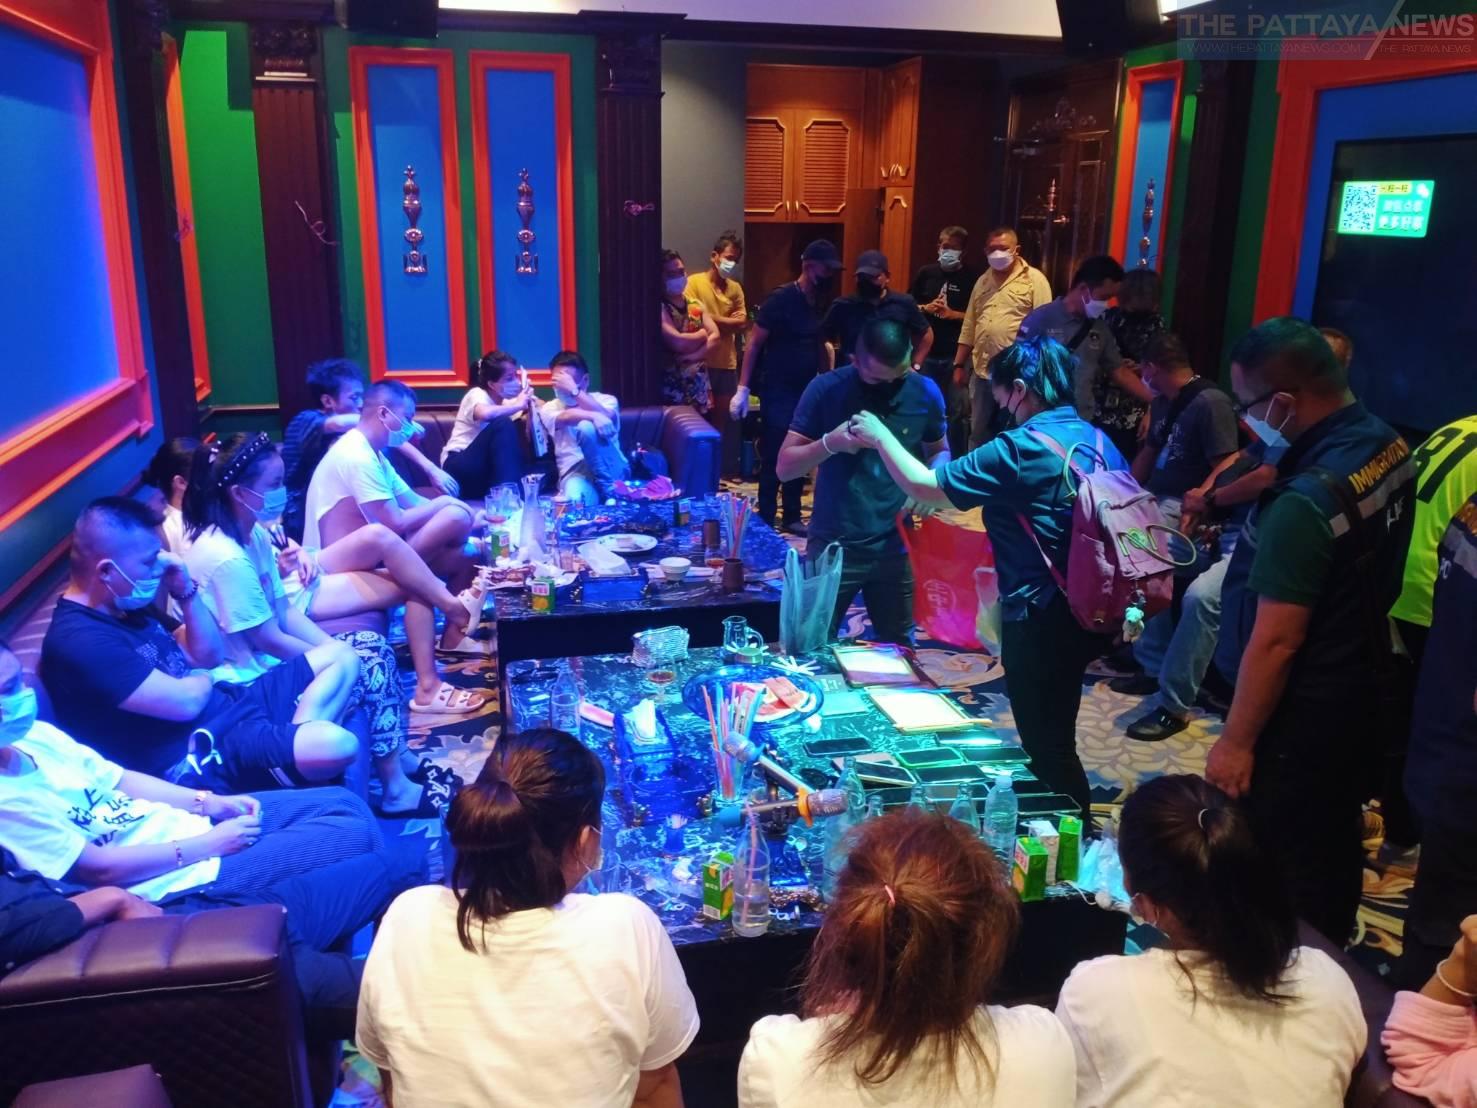 Eight Chinese nationals, six Burmese, and two Thais arrested at party in Pattaya, allegedly with illegal drugs